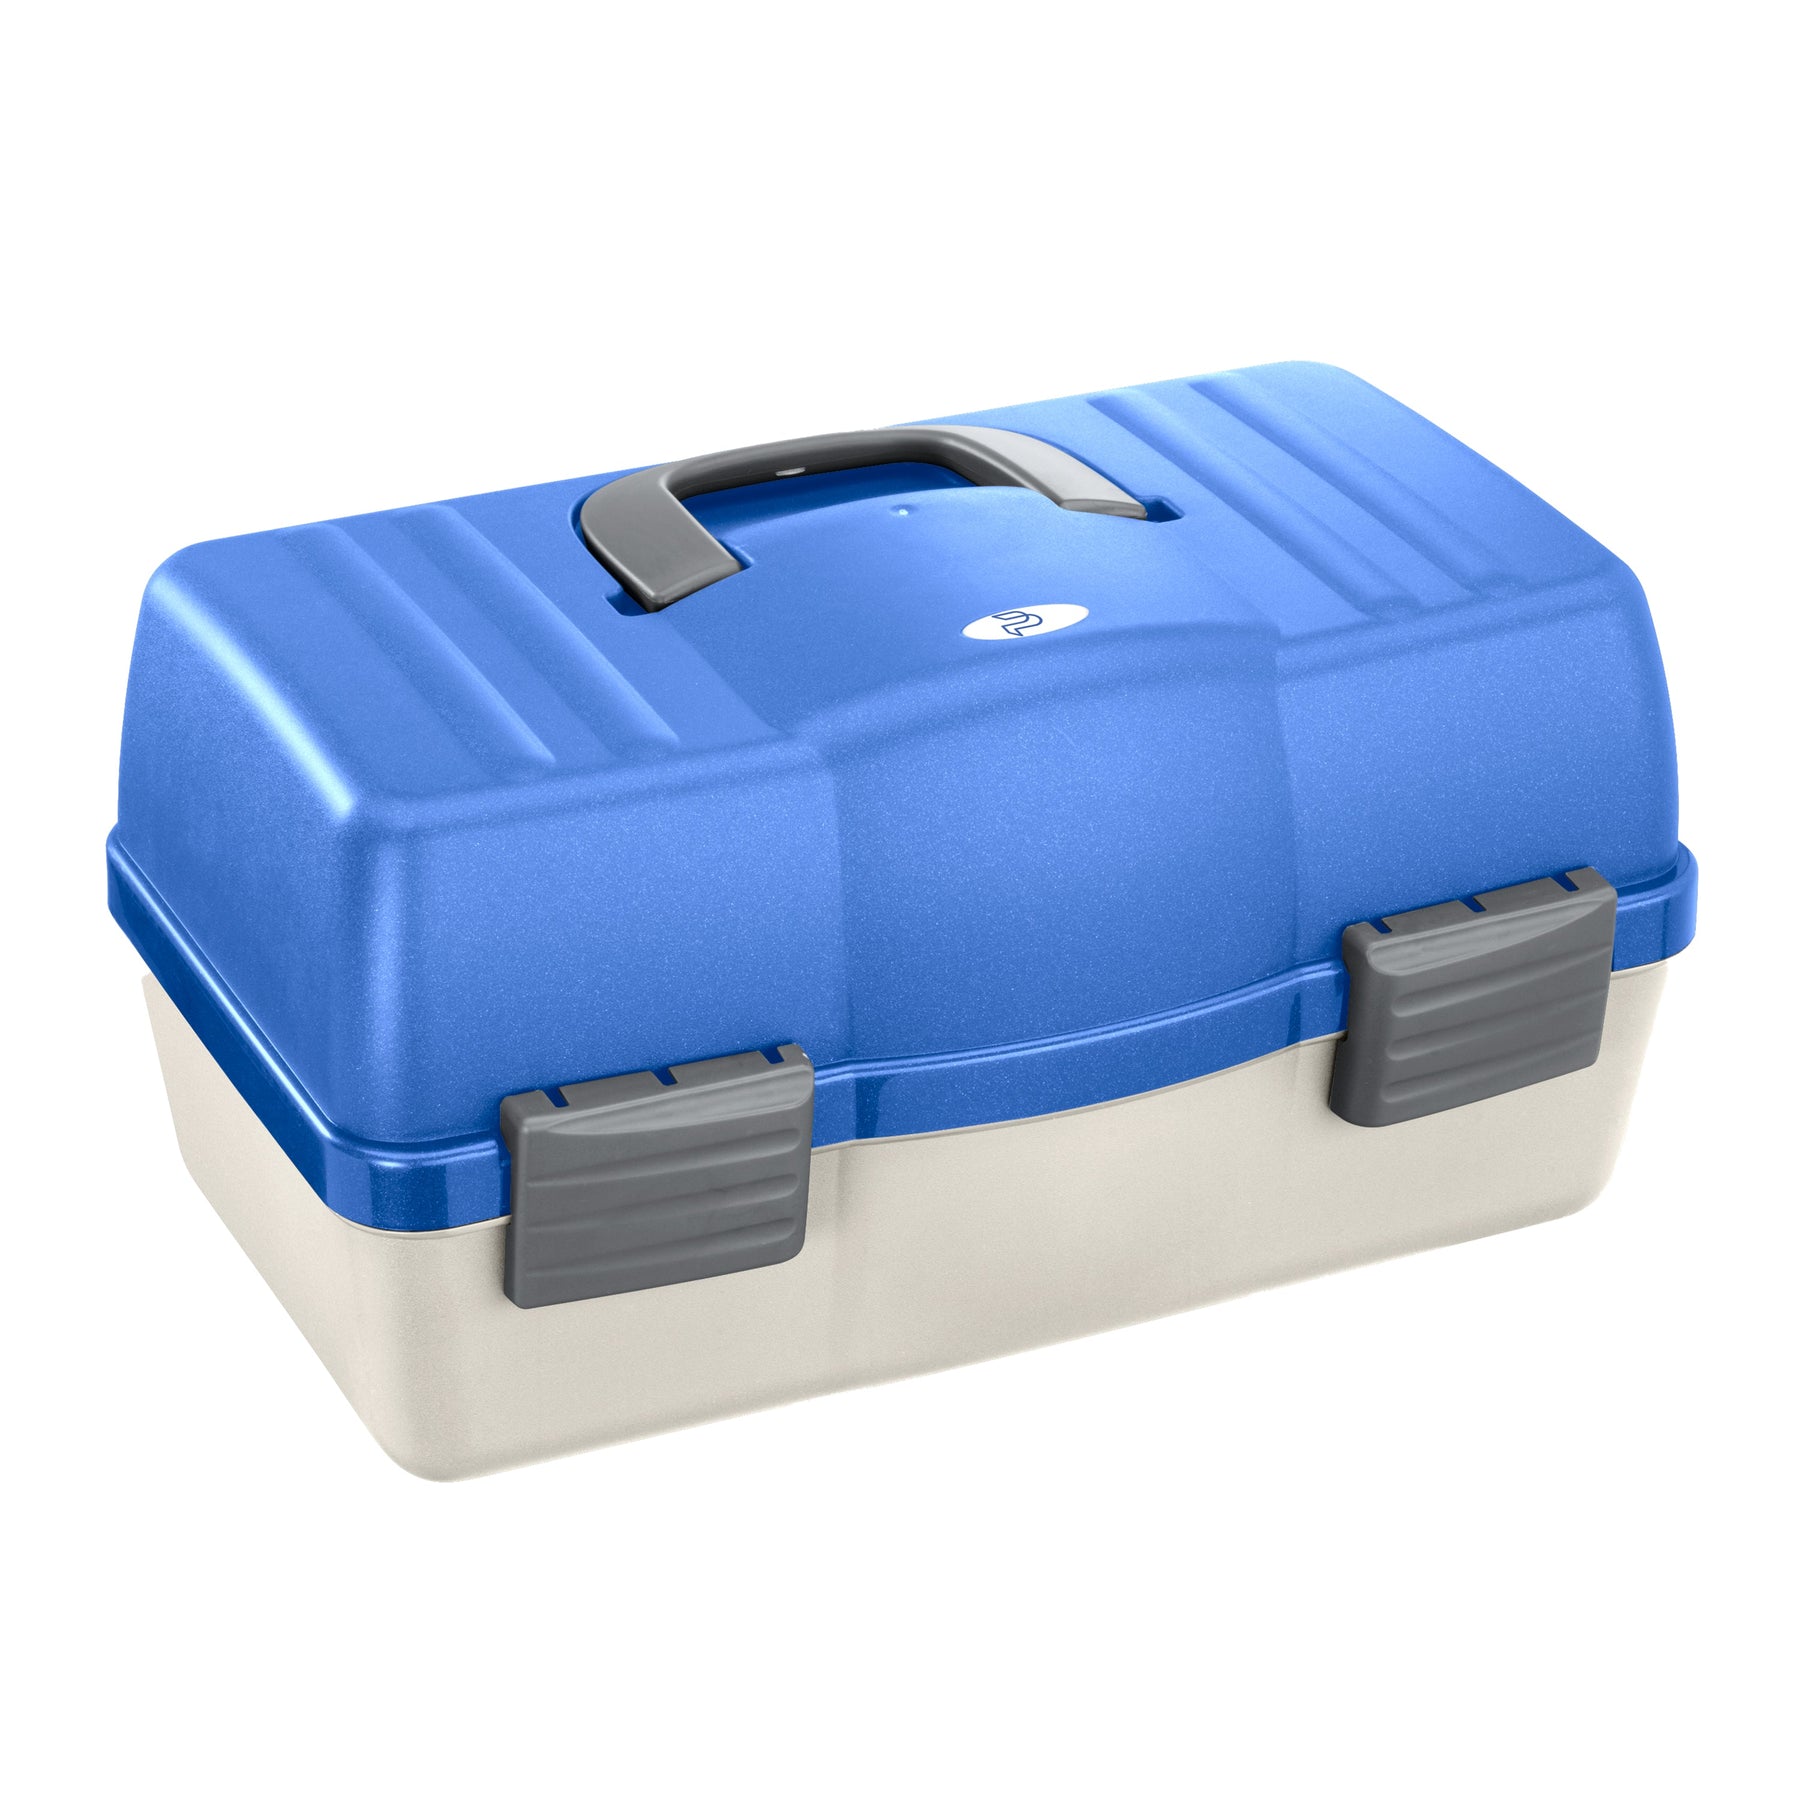 Panaro  138 White and Blue Tackle Box, with 6 Shelves - BellGear –  BellGear (Pty) Ltd